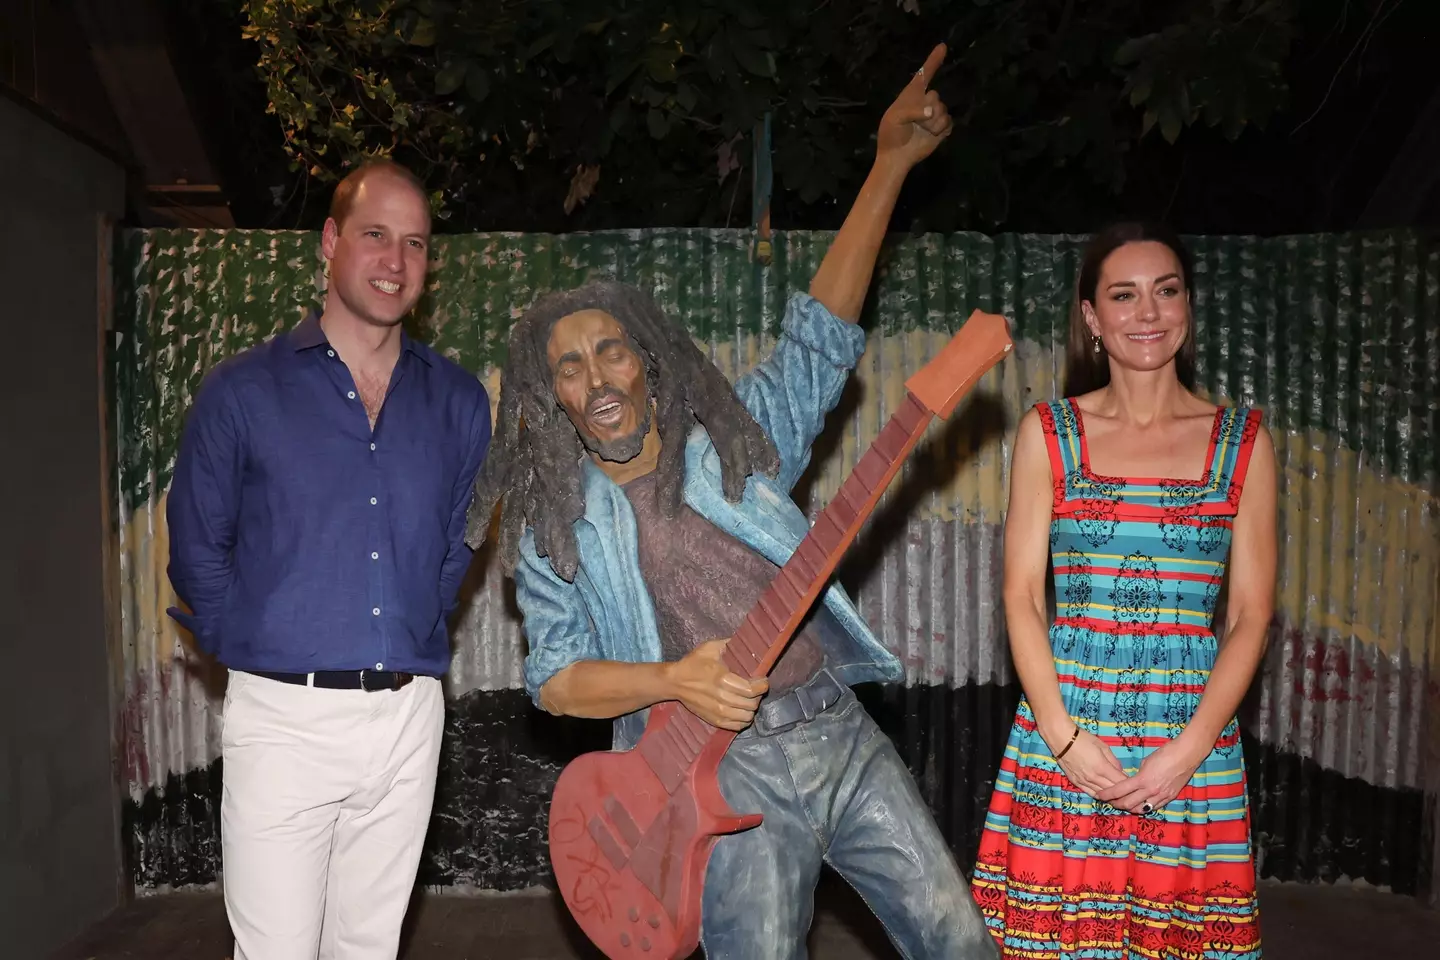 The Duke and Duchess of Cambridge posing next to a cut-out of Bob Marley on their week-long tour in celebration of the Queen's Diamond Jubilee.